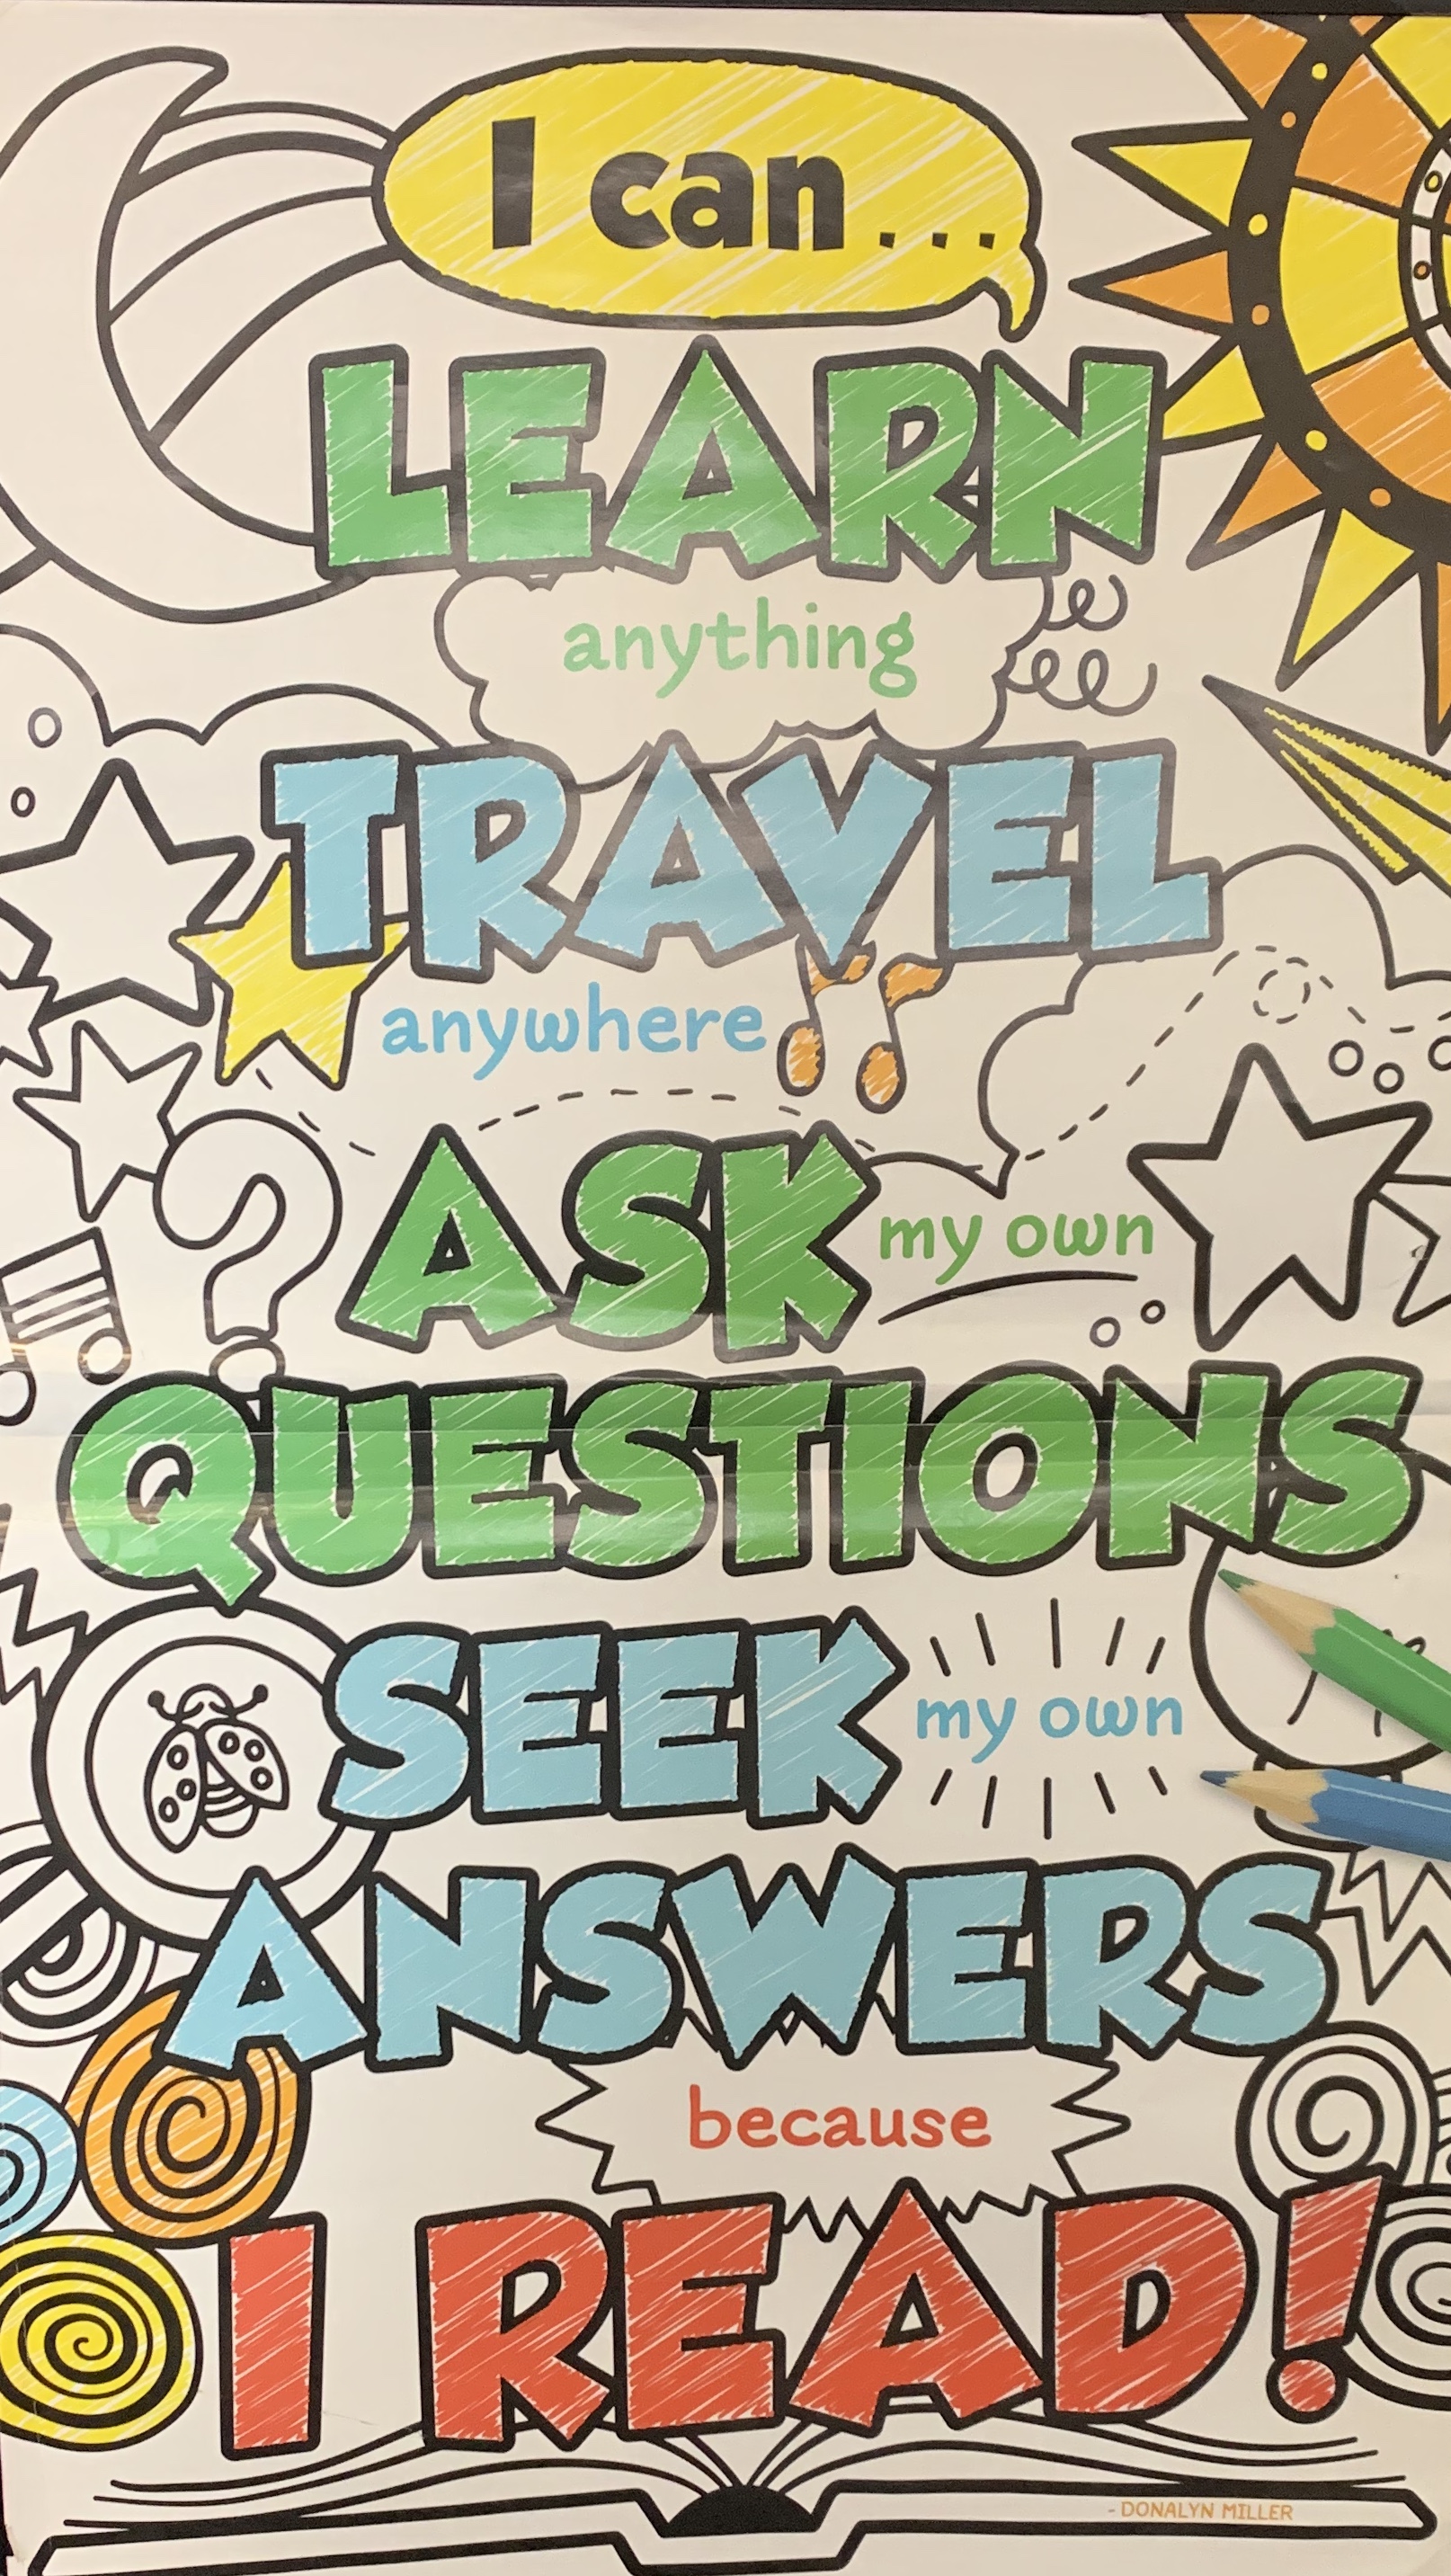 i can learn, travel, ask questions, seek answers book